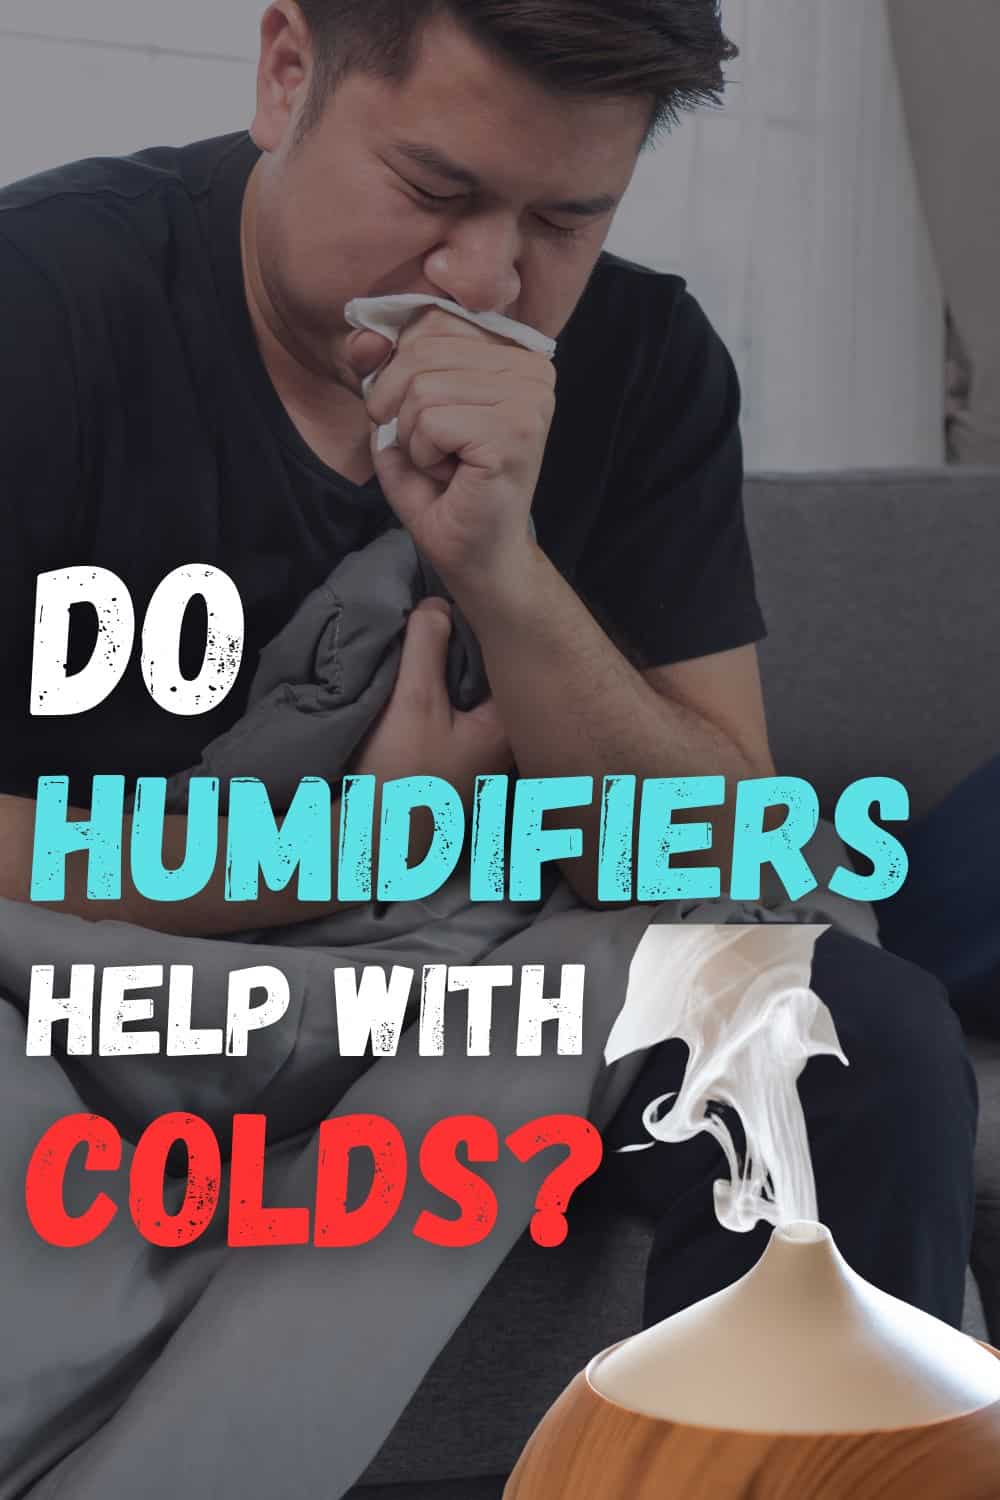 humidifiers can help with cold symptoms like congestion and a cough